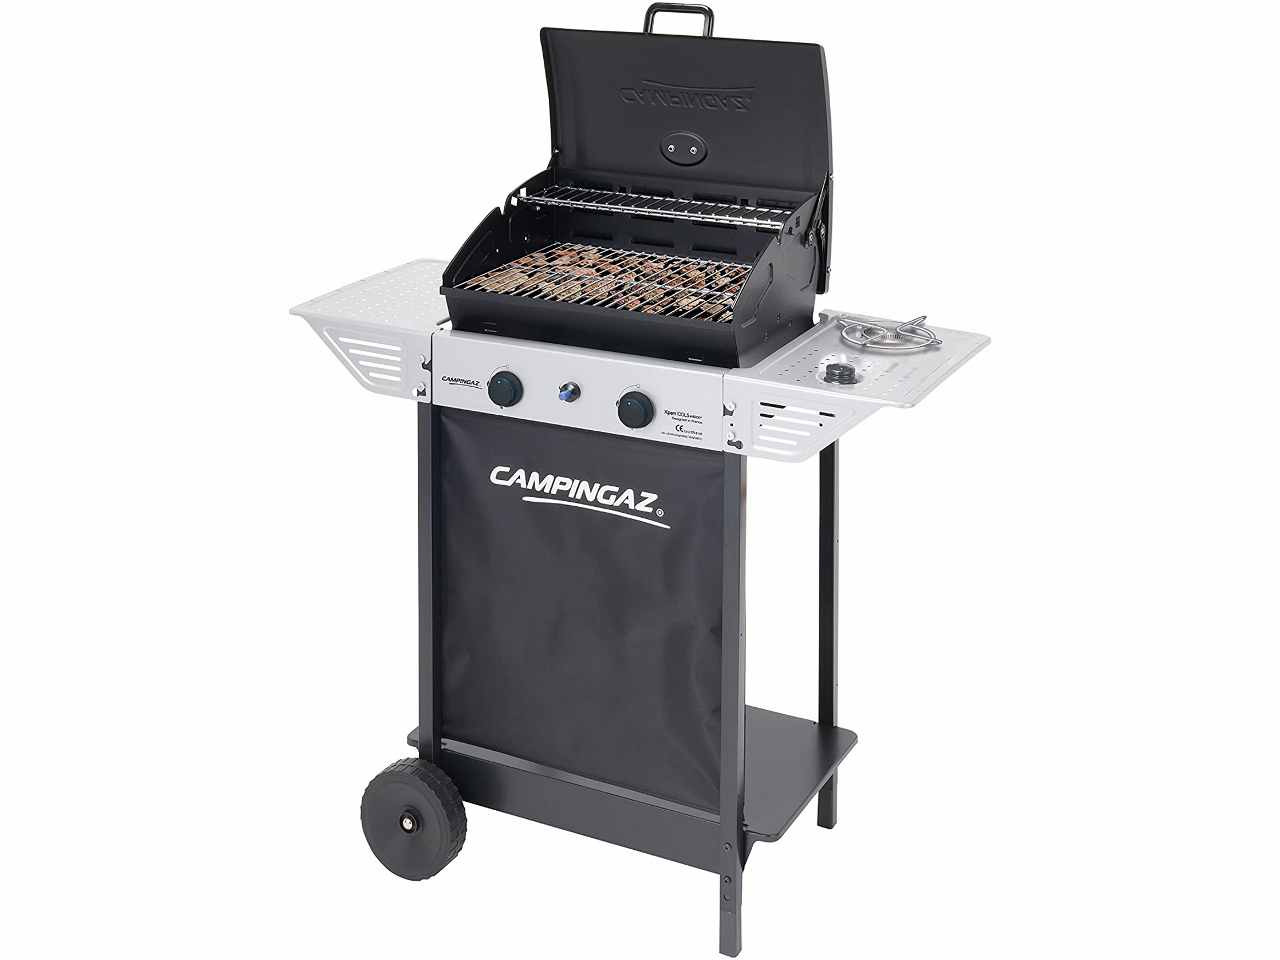 Barbecue xpert 100 ls+ rocky 3000004828